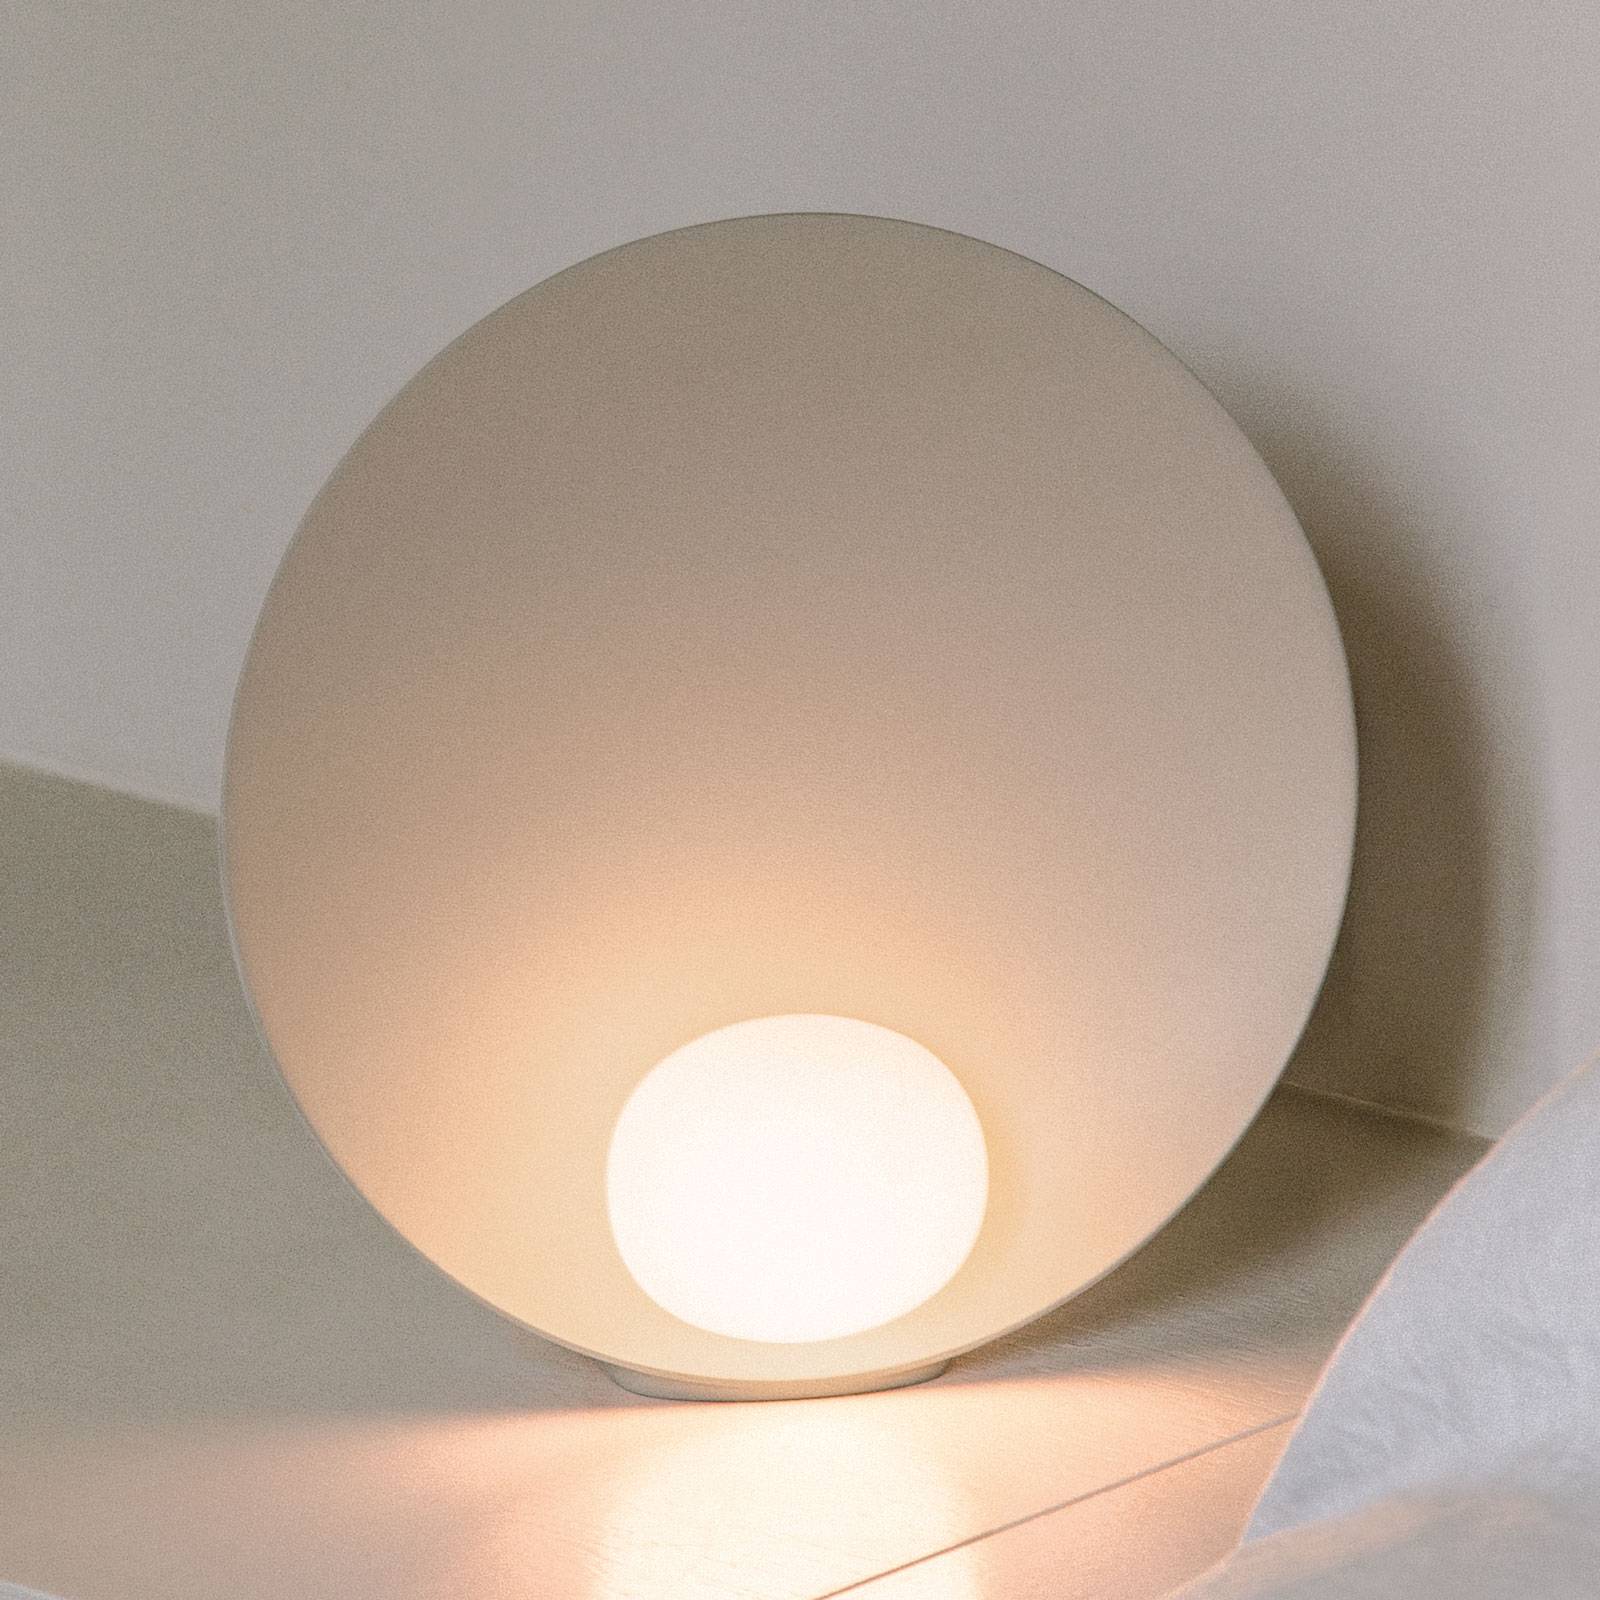 Image of Vibia Musa 7400 lampe à poser LED debout, taupe 